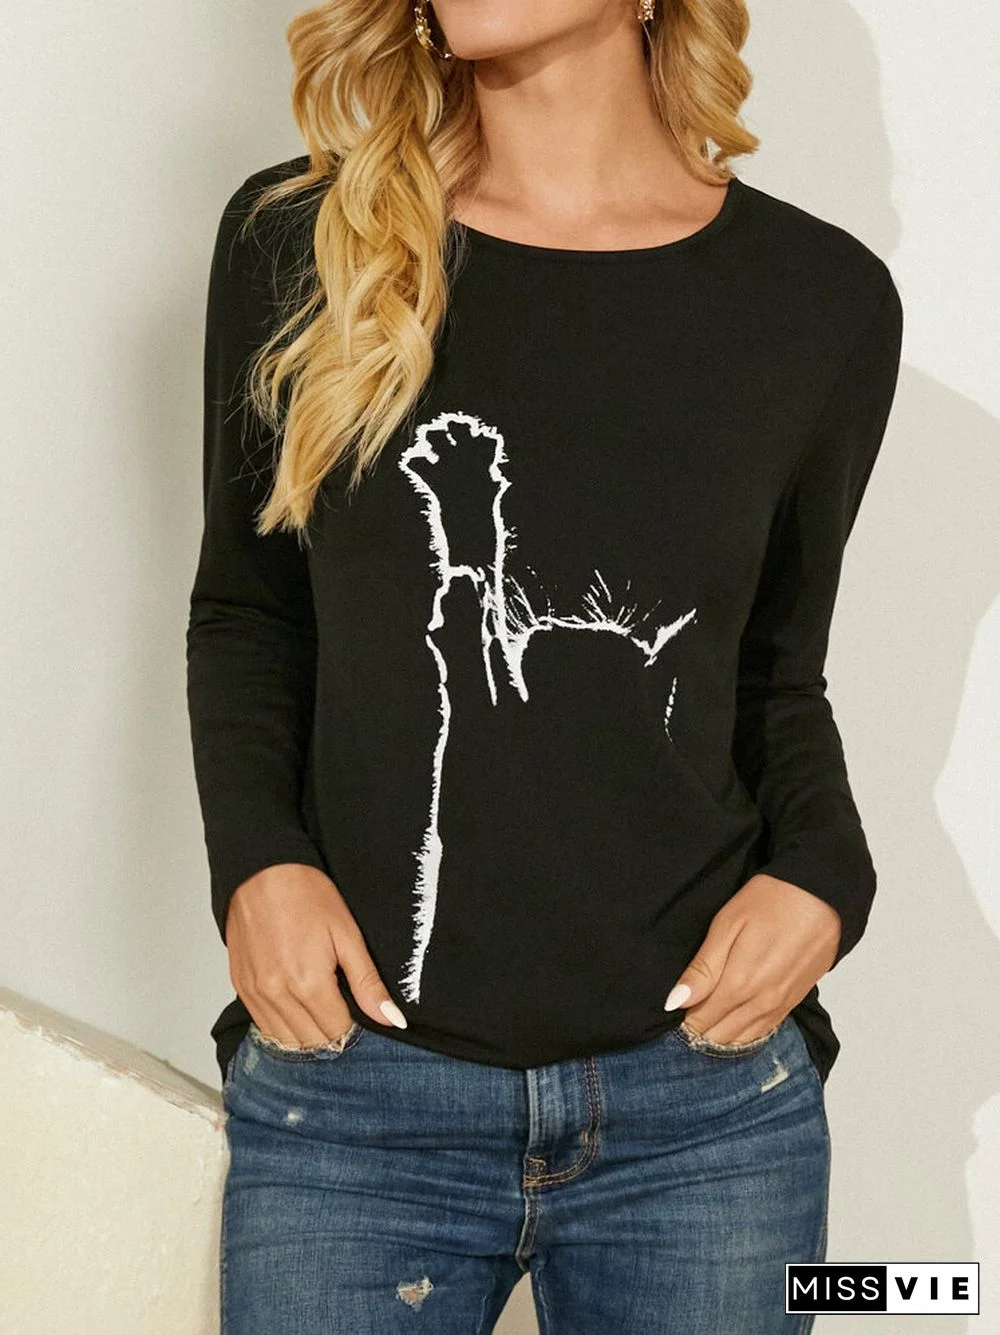 Cat Print Long Sleeves O-neck Casual T-shirt for Women